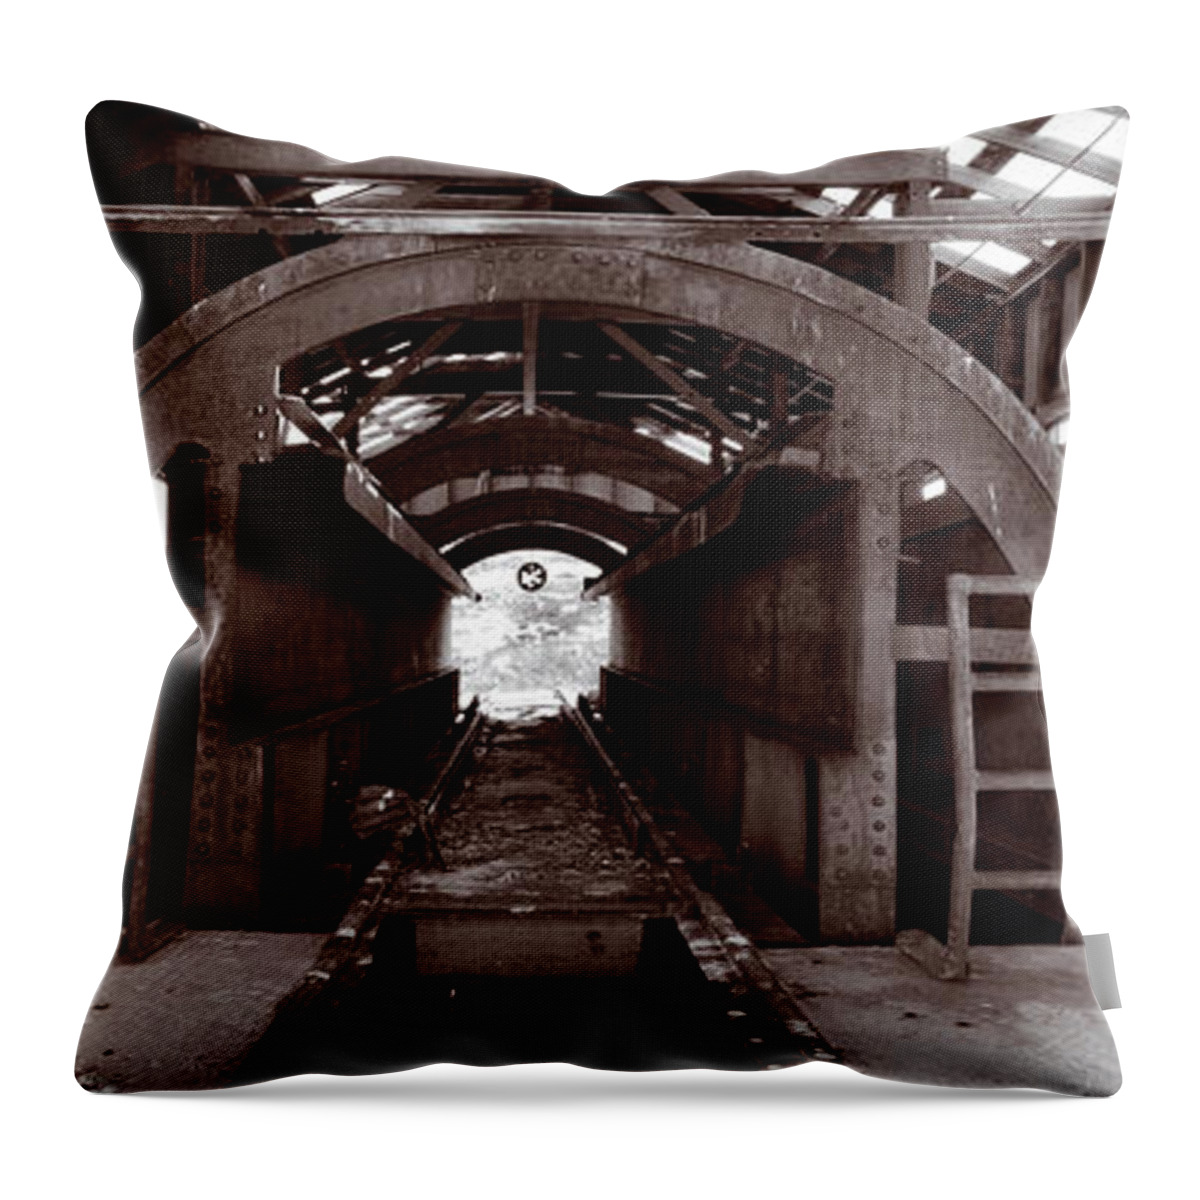 Beautiful Throw Pillow featuring the photograph Railroad Car Inverter 1 Sepia by Roger Snyder